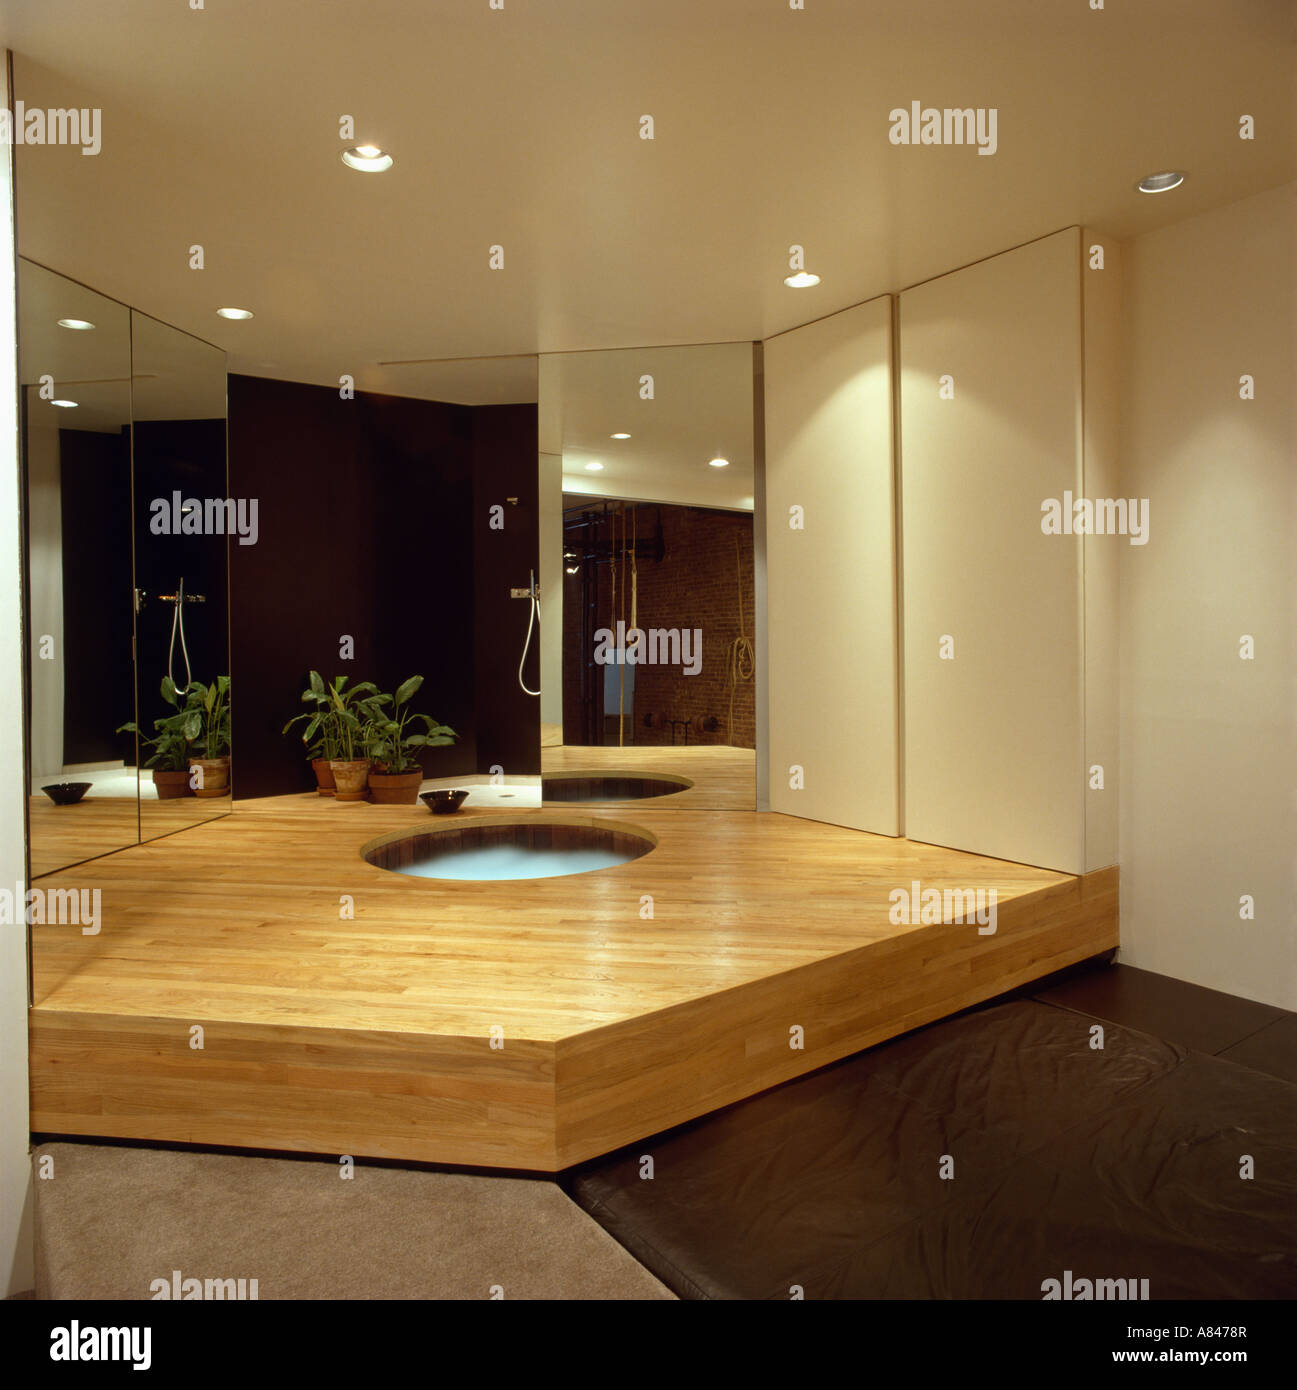 Hot tub in raised wooden platform in modern city bathroom with mirrored wall Stock Photo